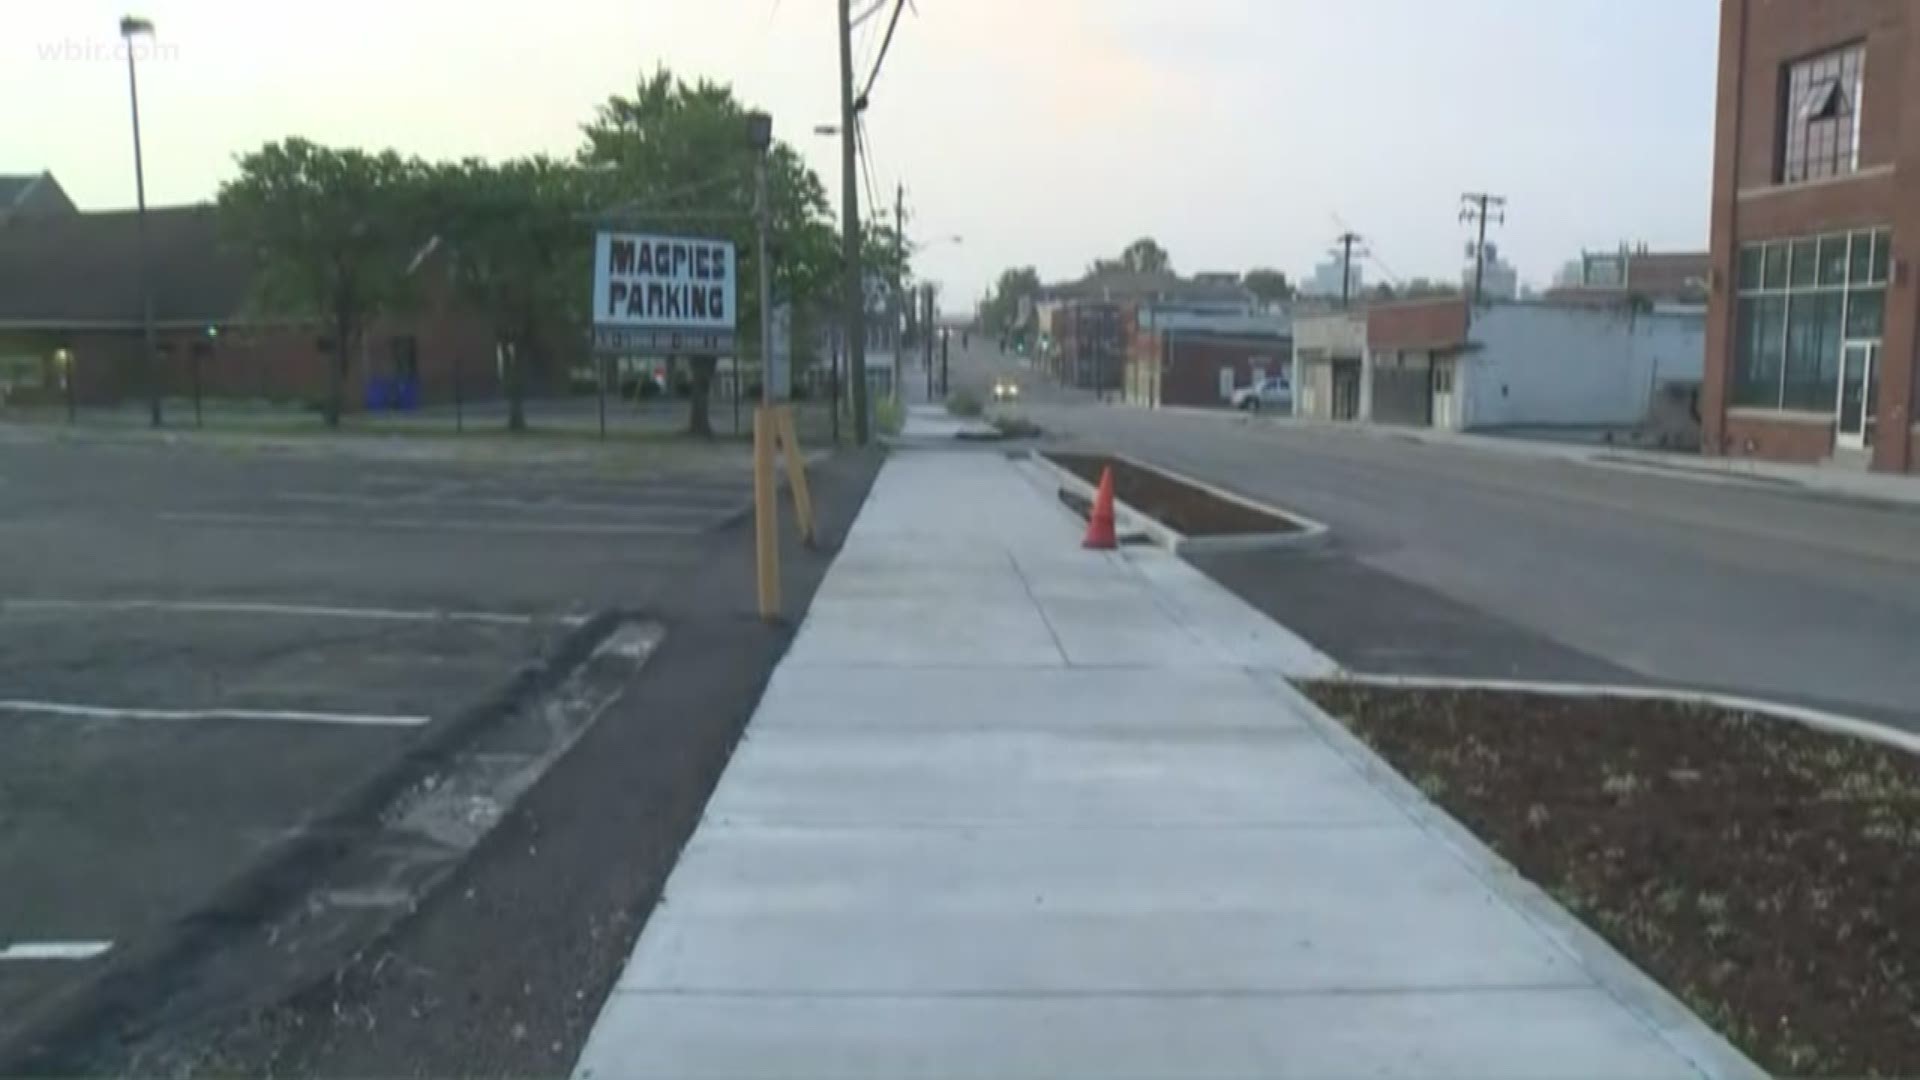 WBIR 10News Reporter Yvonne Thomas has an update from the city about the work they've completed and what's left to do.